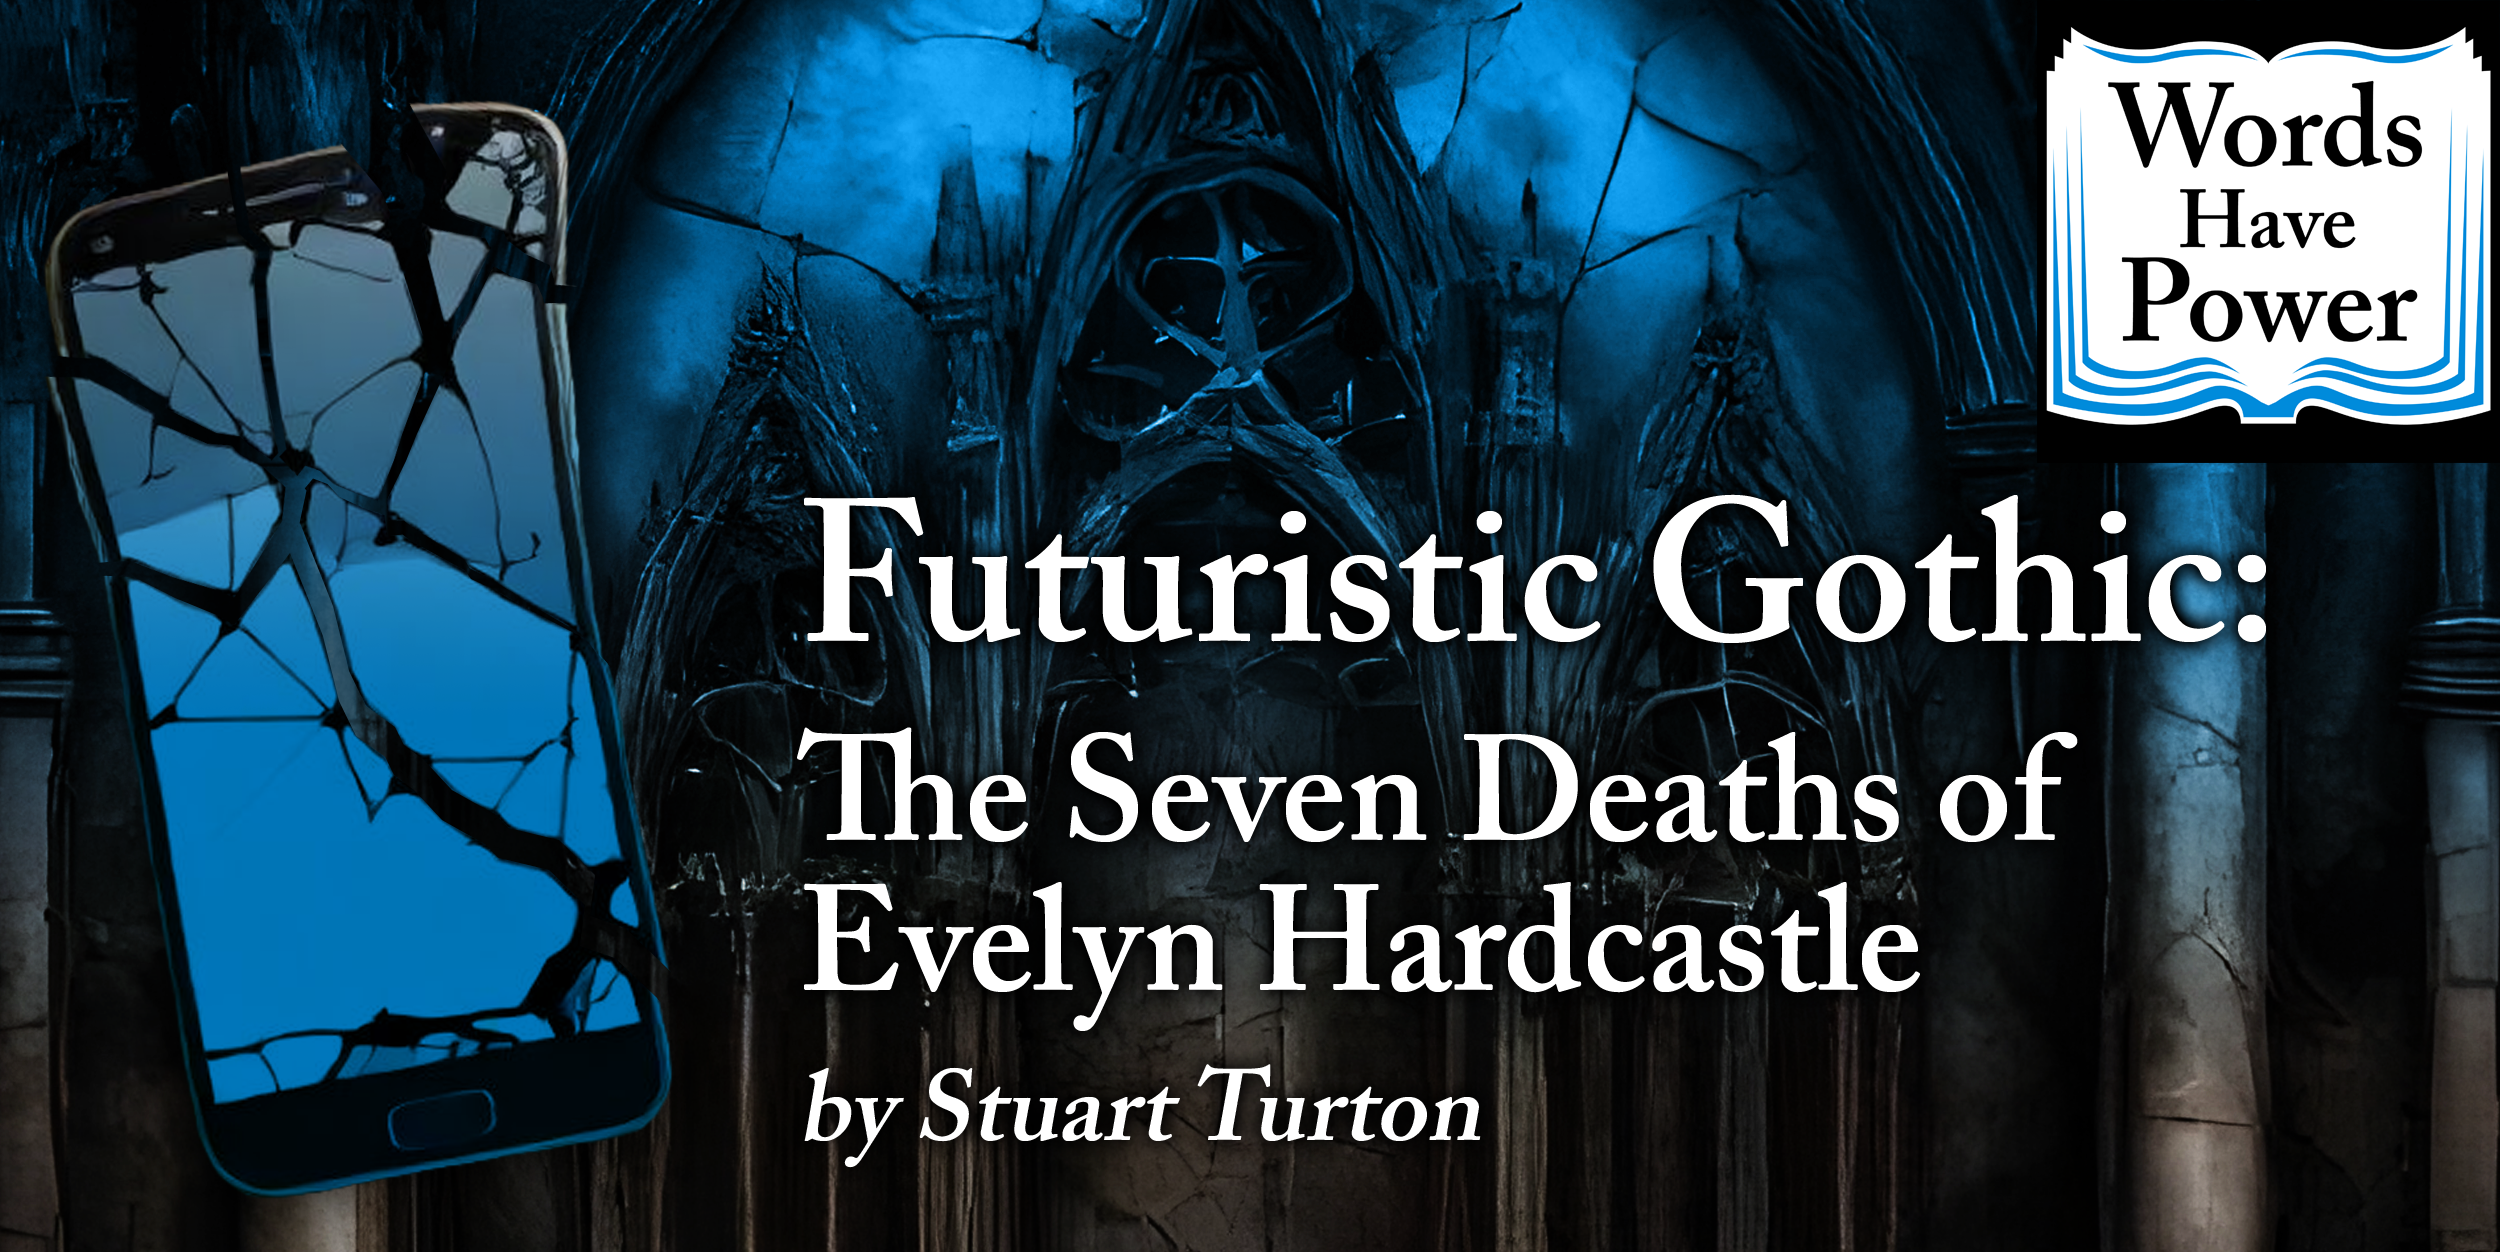 Futuristic Gothic: The Seven Deaths of Evelyn Hardcastle by Stuart Turton